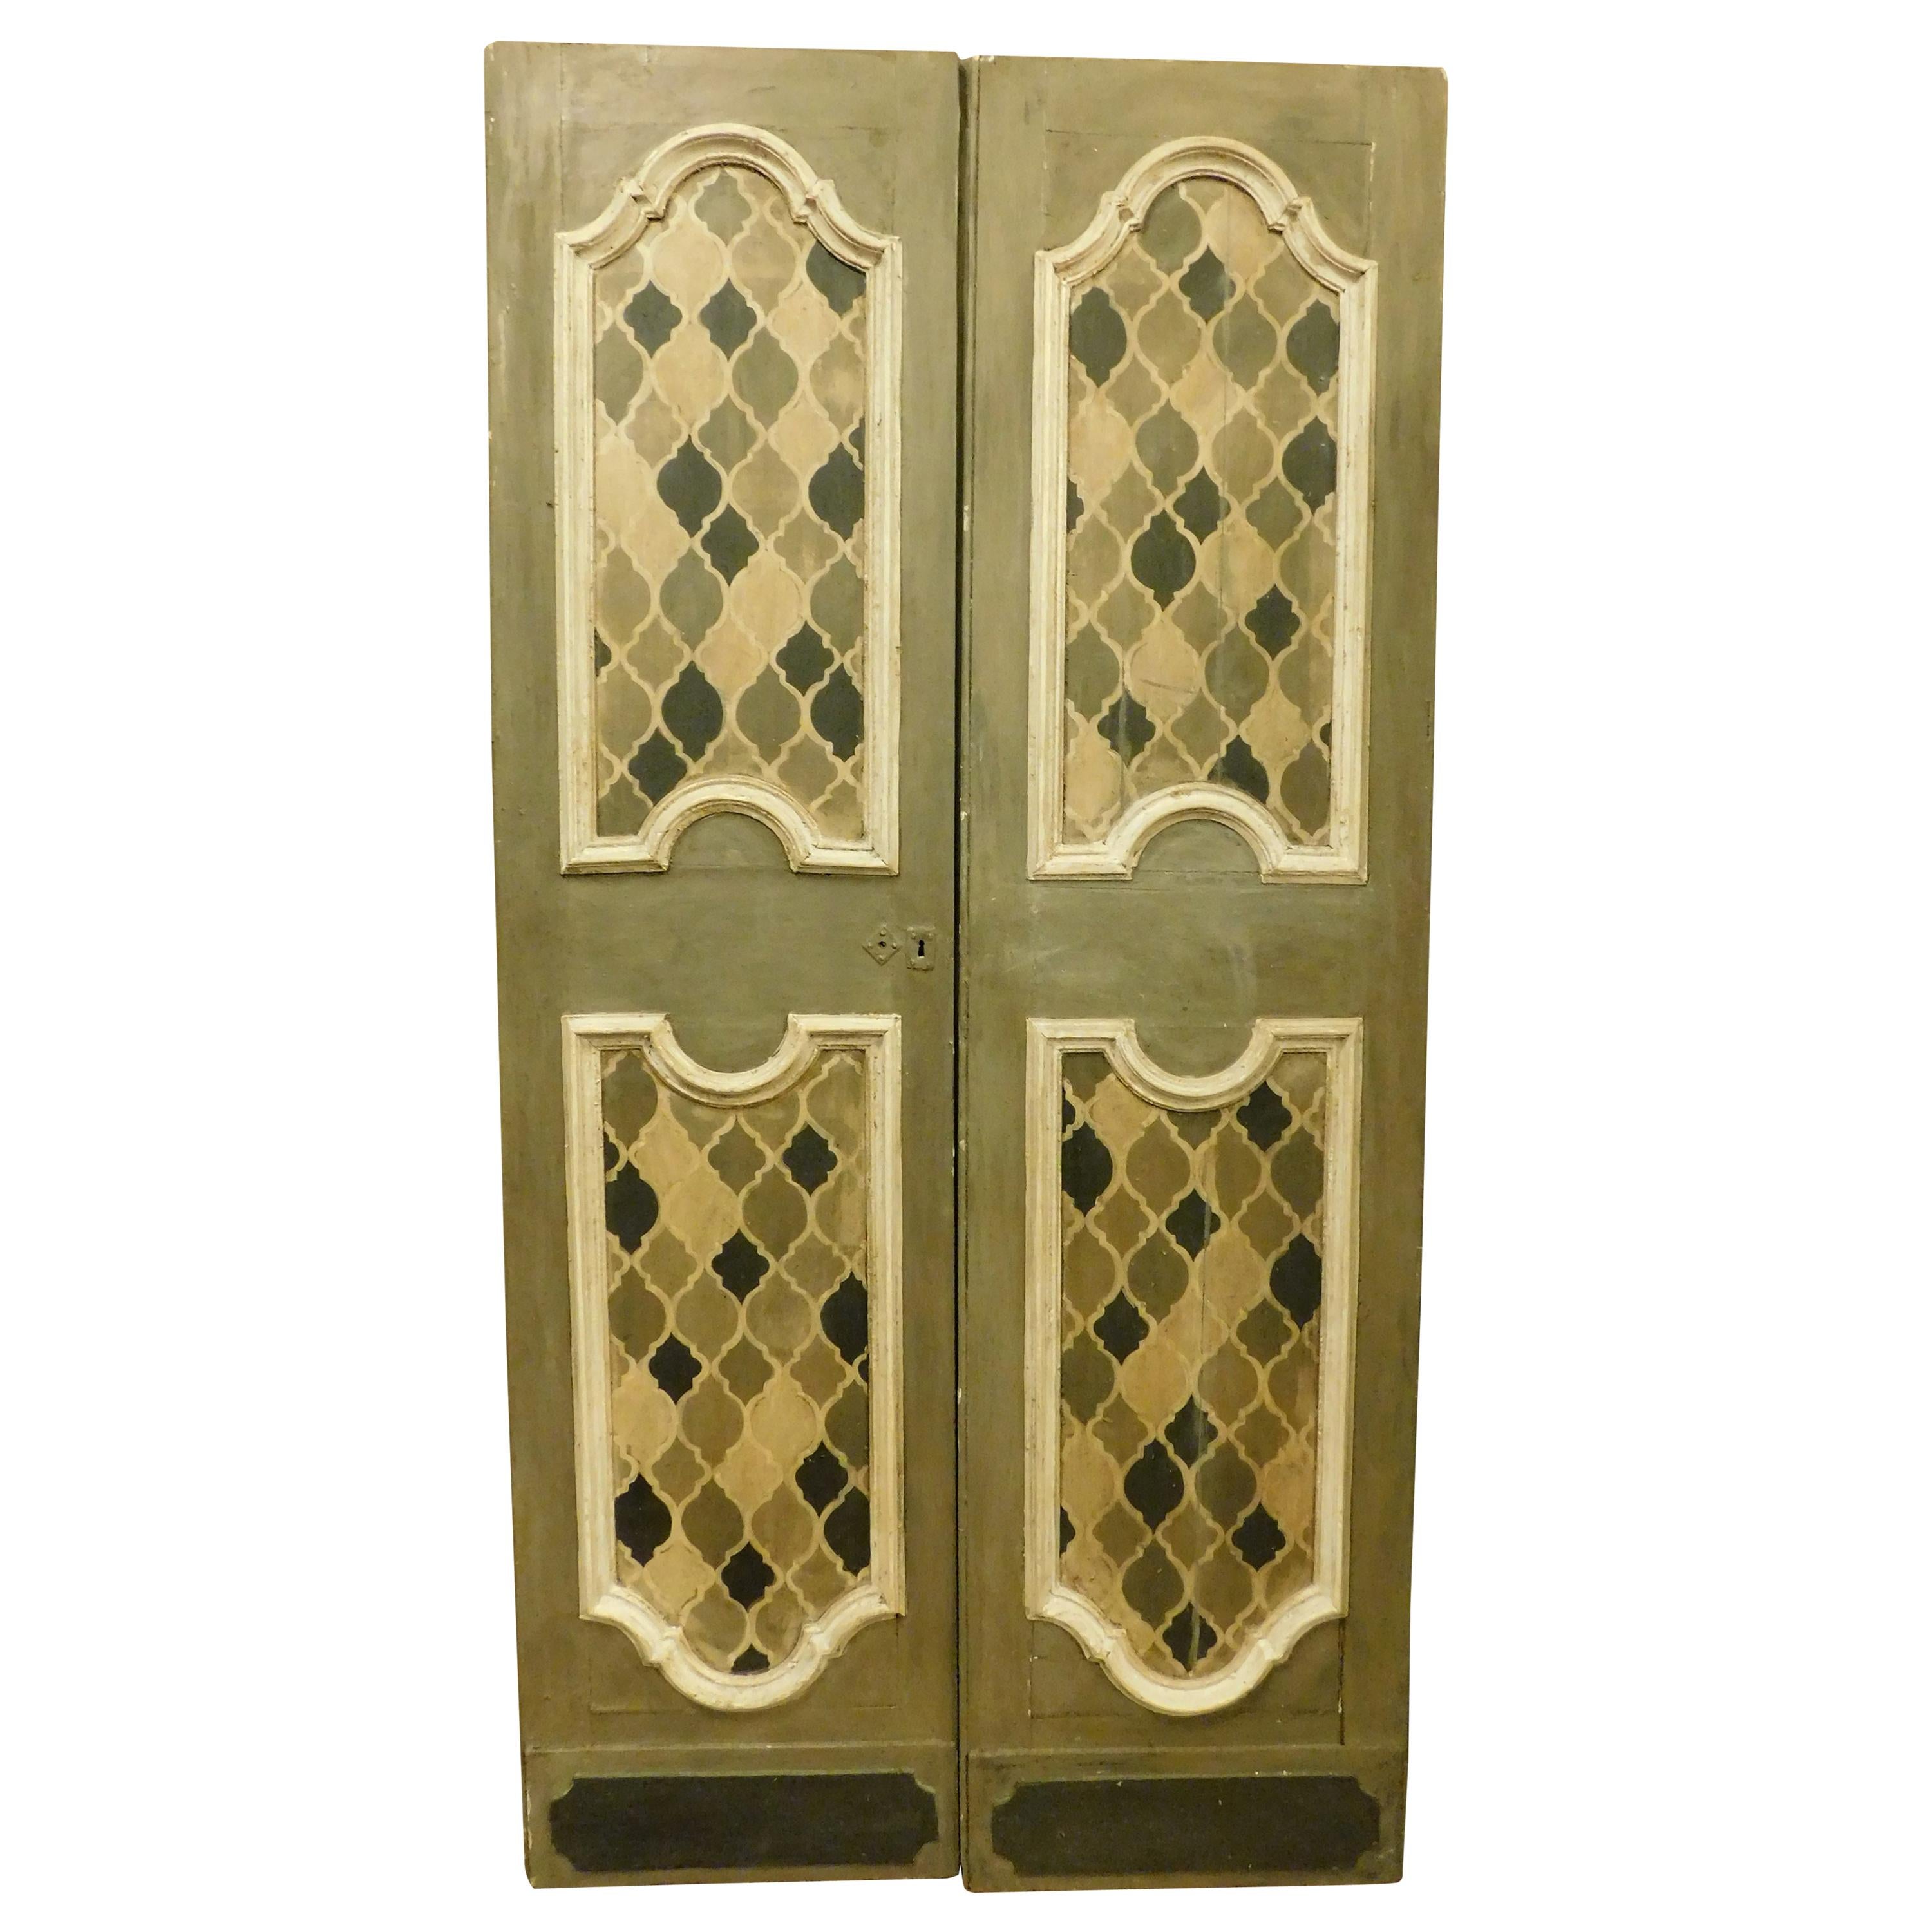 Antique Lacquered Hand-Painted Door, 18th Century Florence, Gray, White and Chess